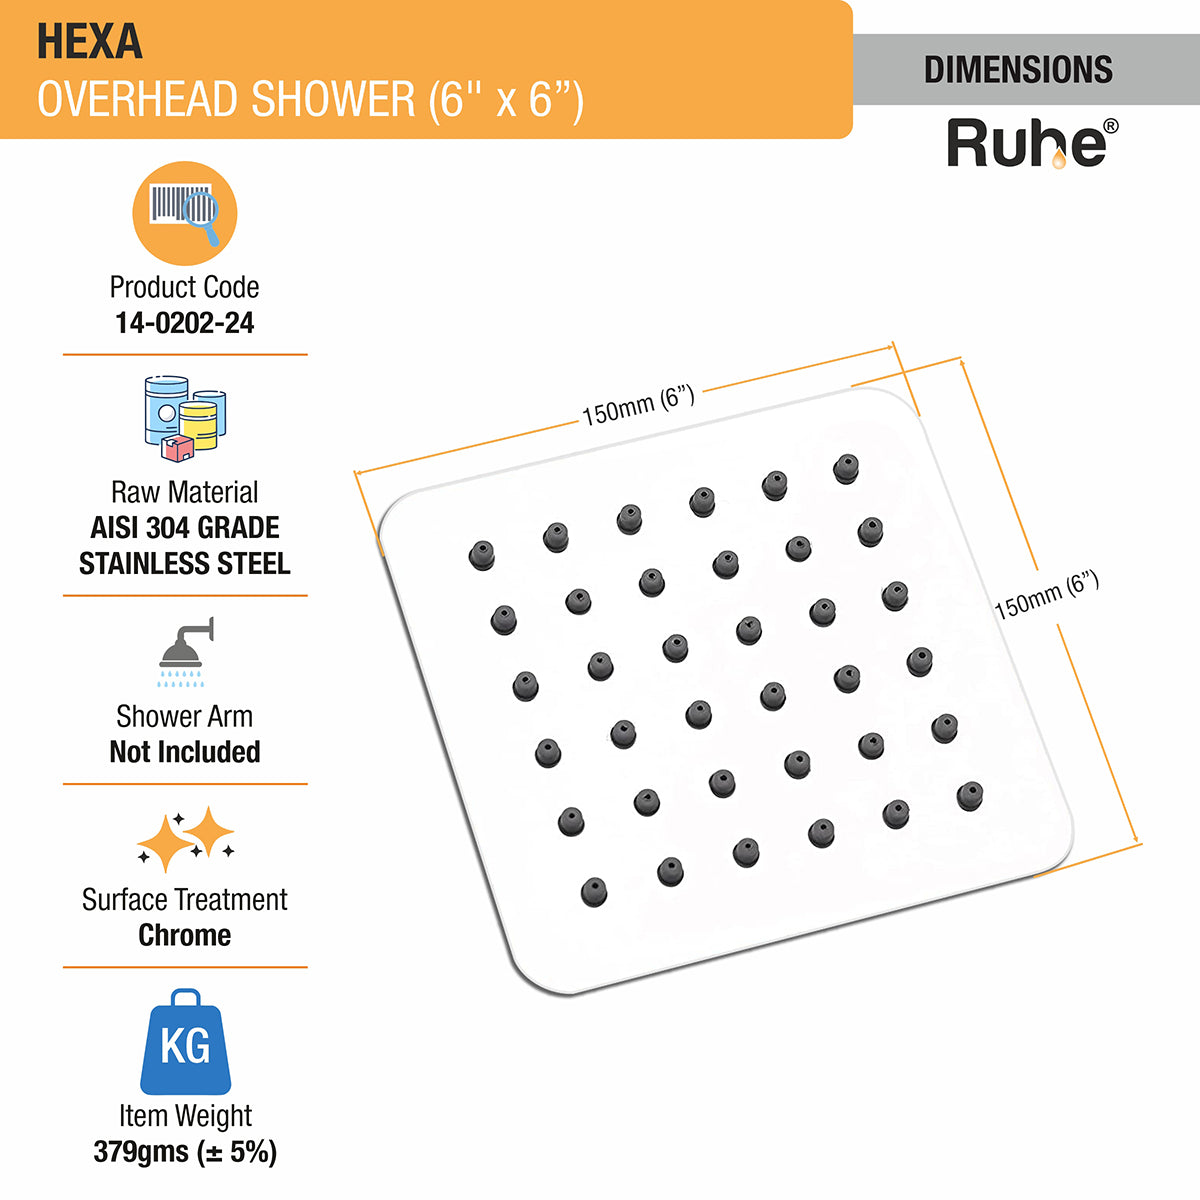 Hexa 304-Grade Overhead Shower (6 x 6 Inches) dimensions and sizes